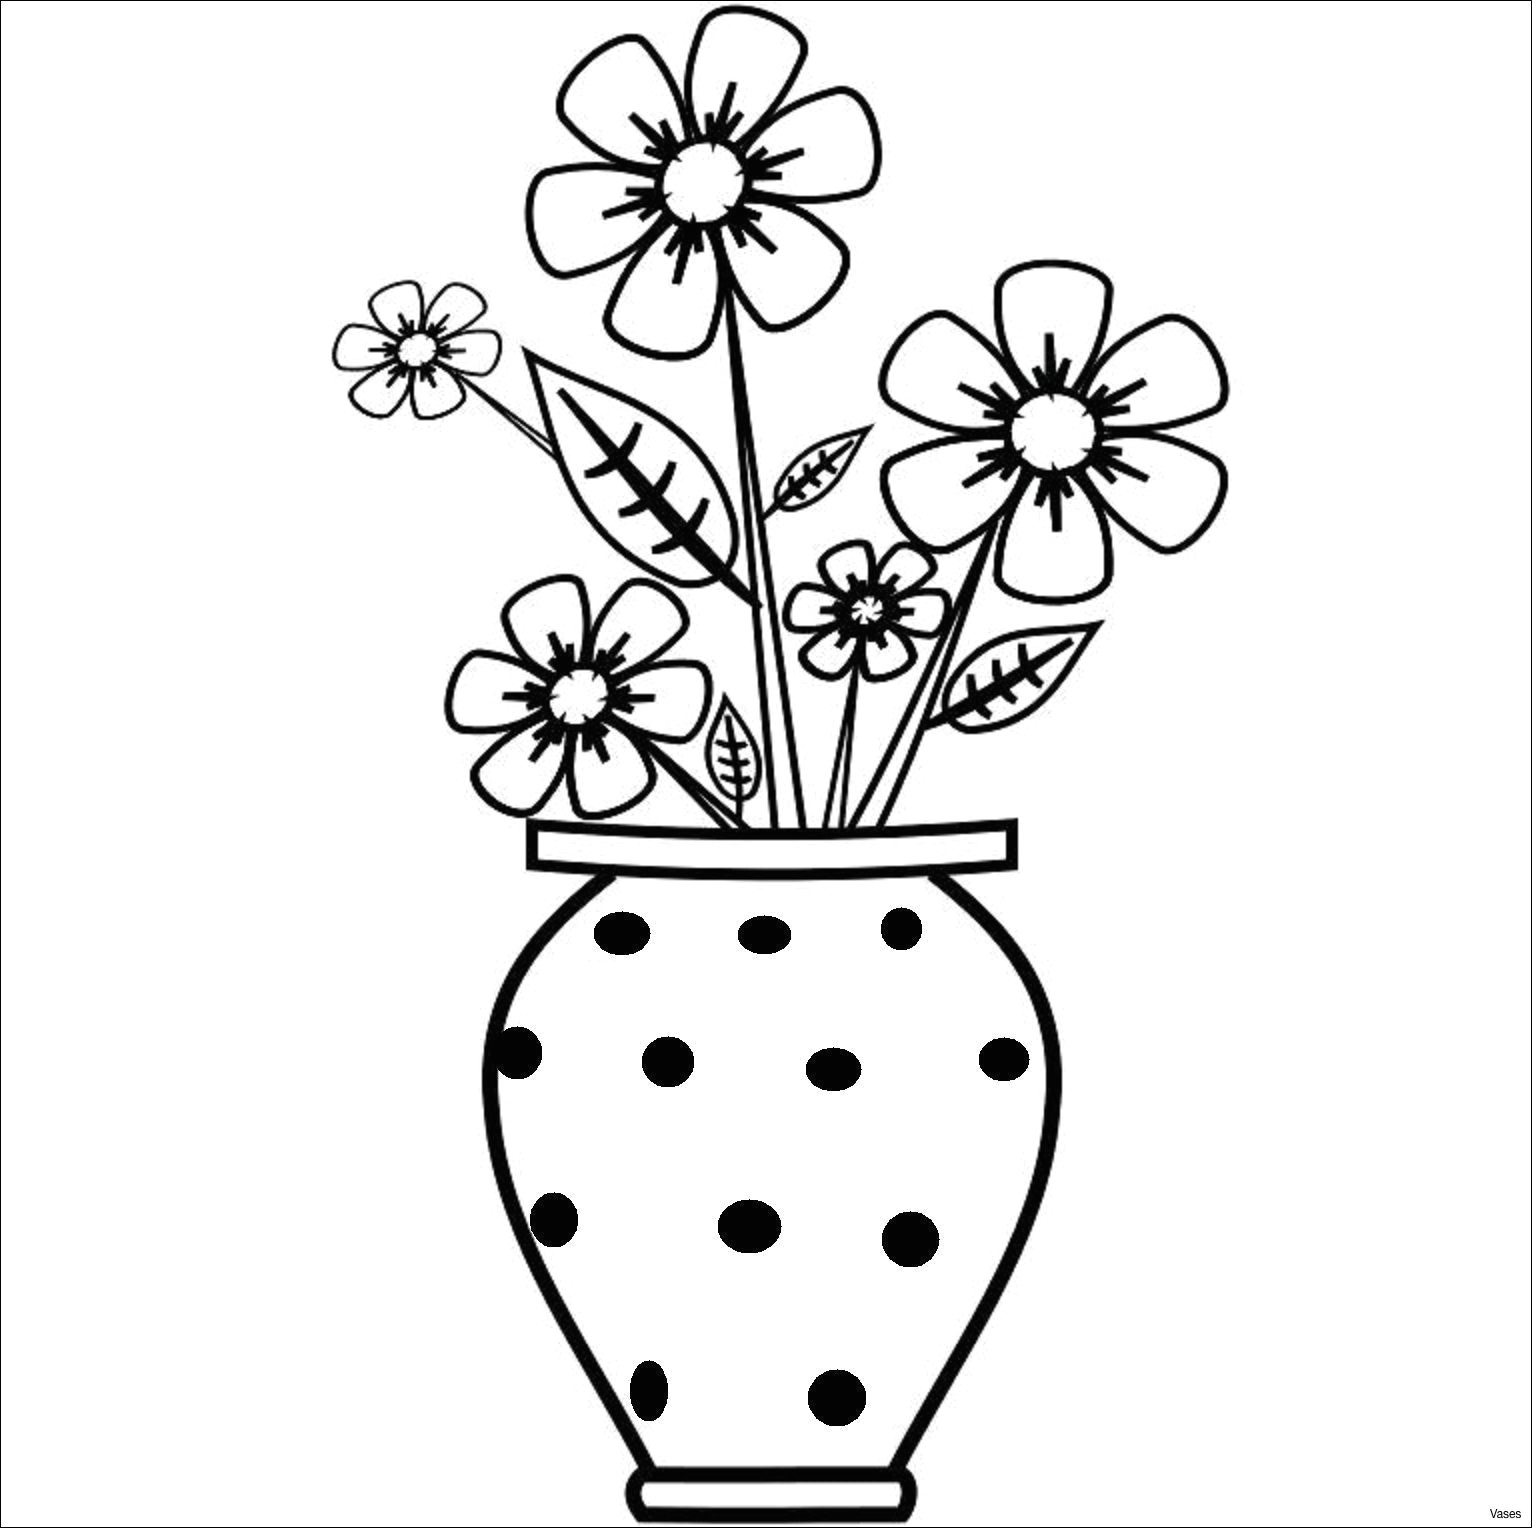 Drawing Of Flower Pot Design Images Of Easy Drawings Vase Art Drawings How to Draw A Vase Step 2h